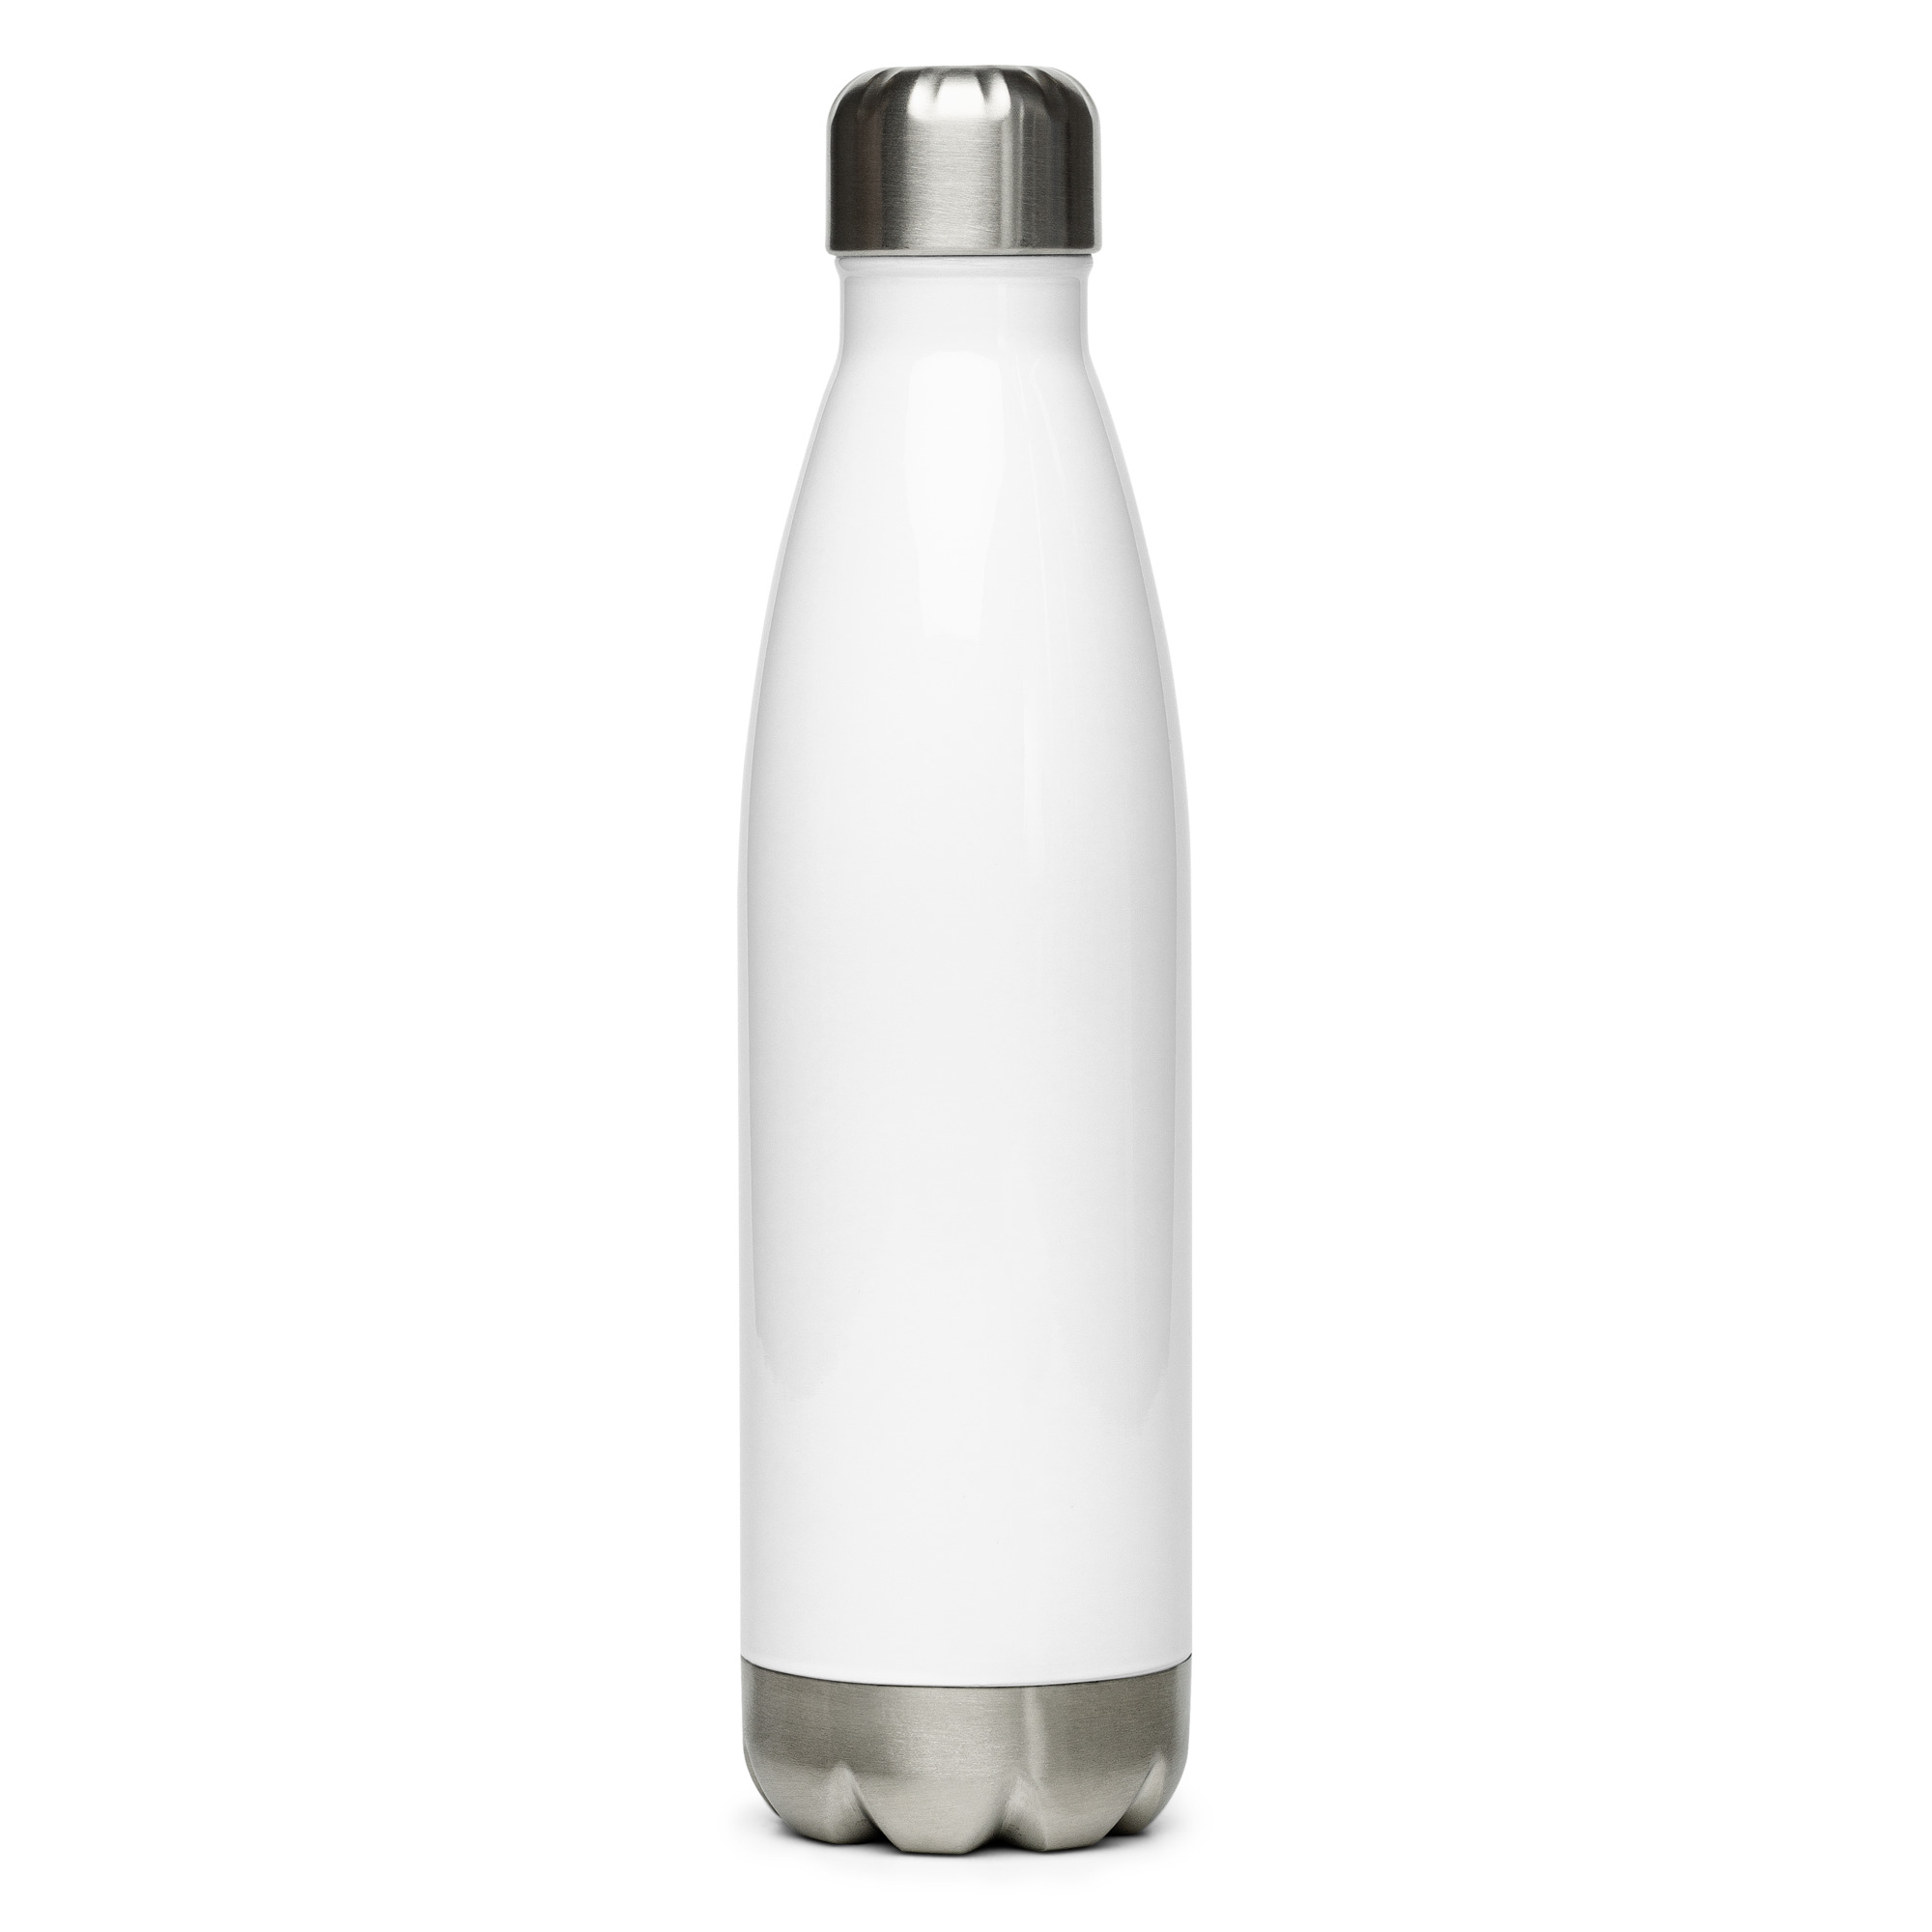 stainless-steel-water-bottle-white-17-oz-back-65228a55bd03a.jpg